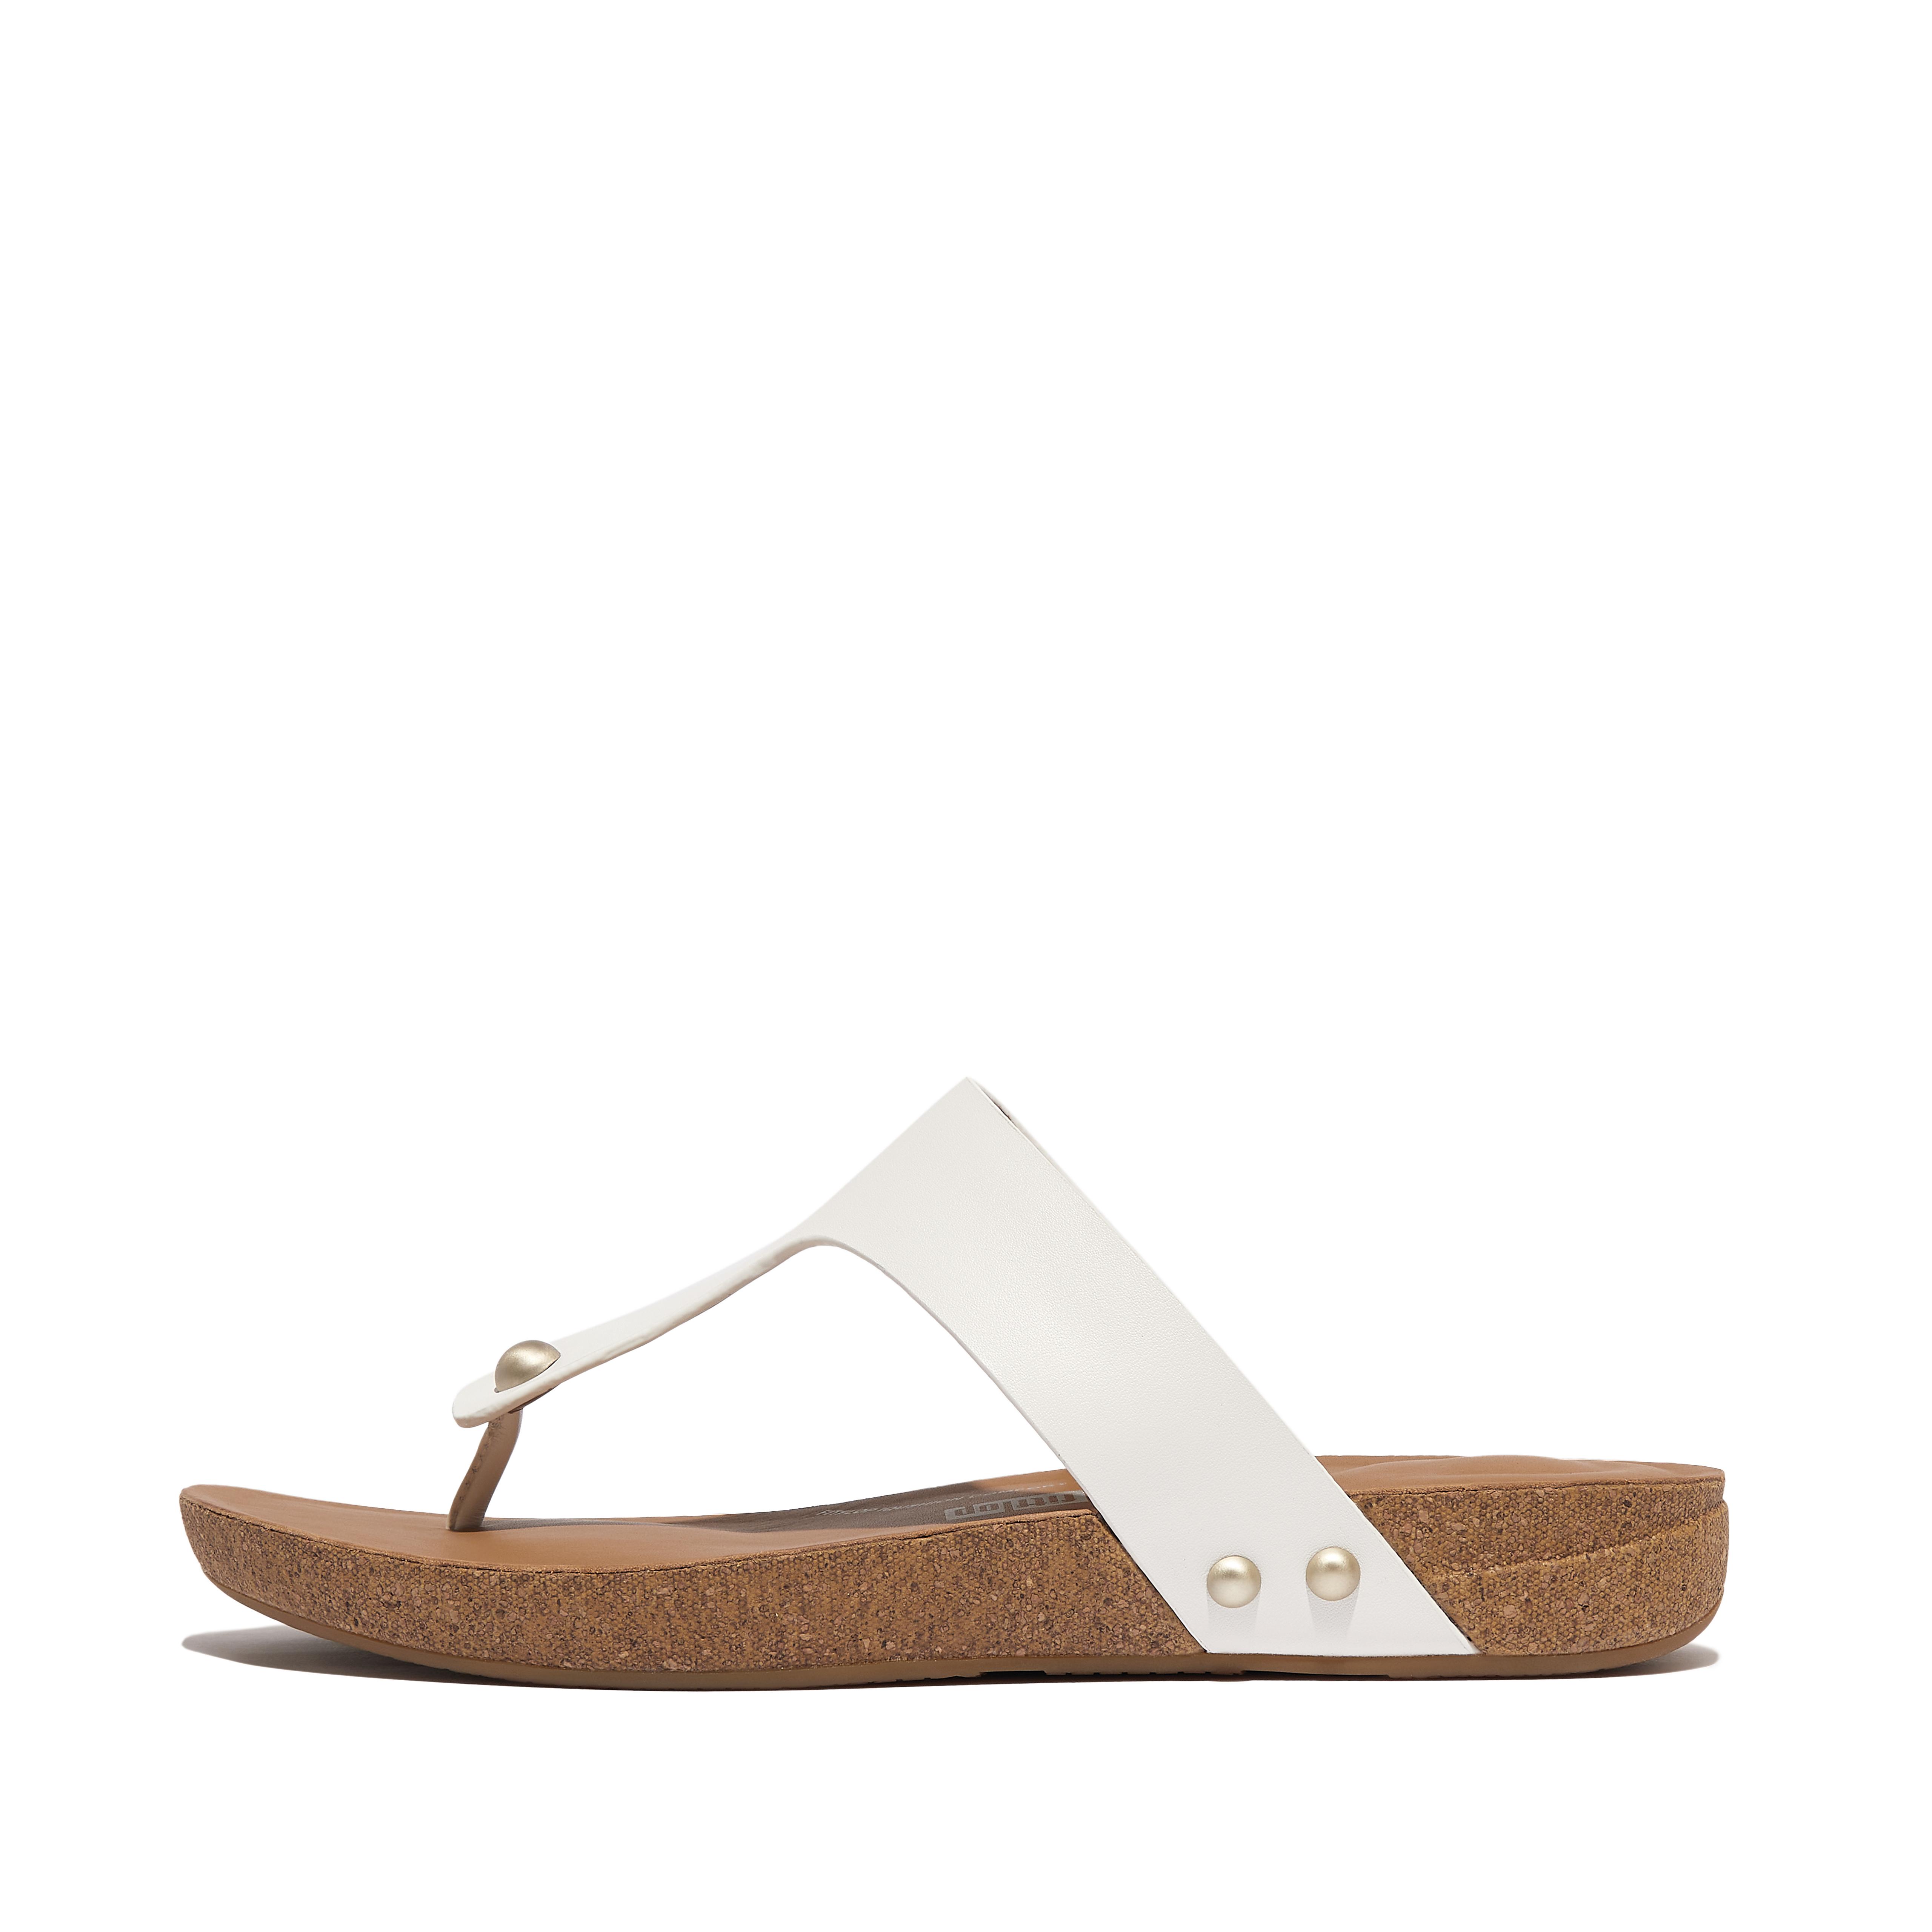 Fitflop Leather Toe-Post Sandals,Urban White